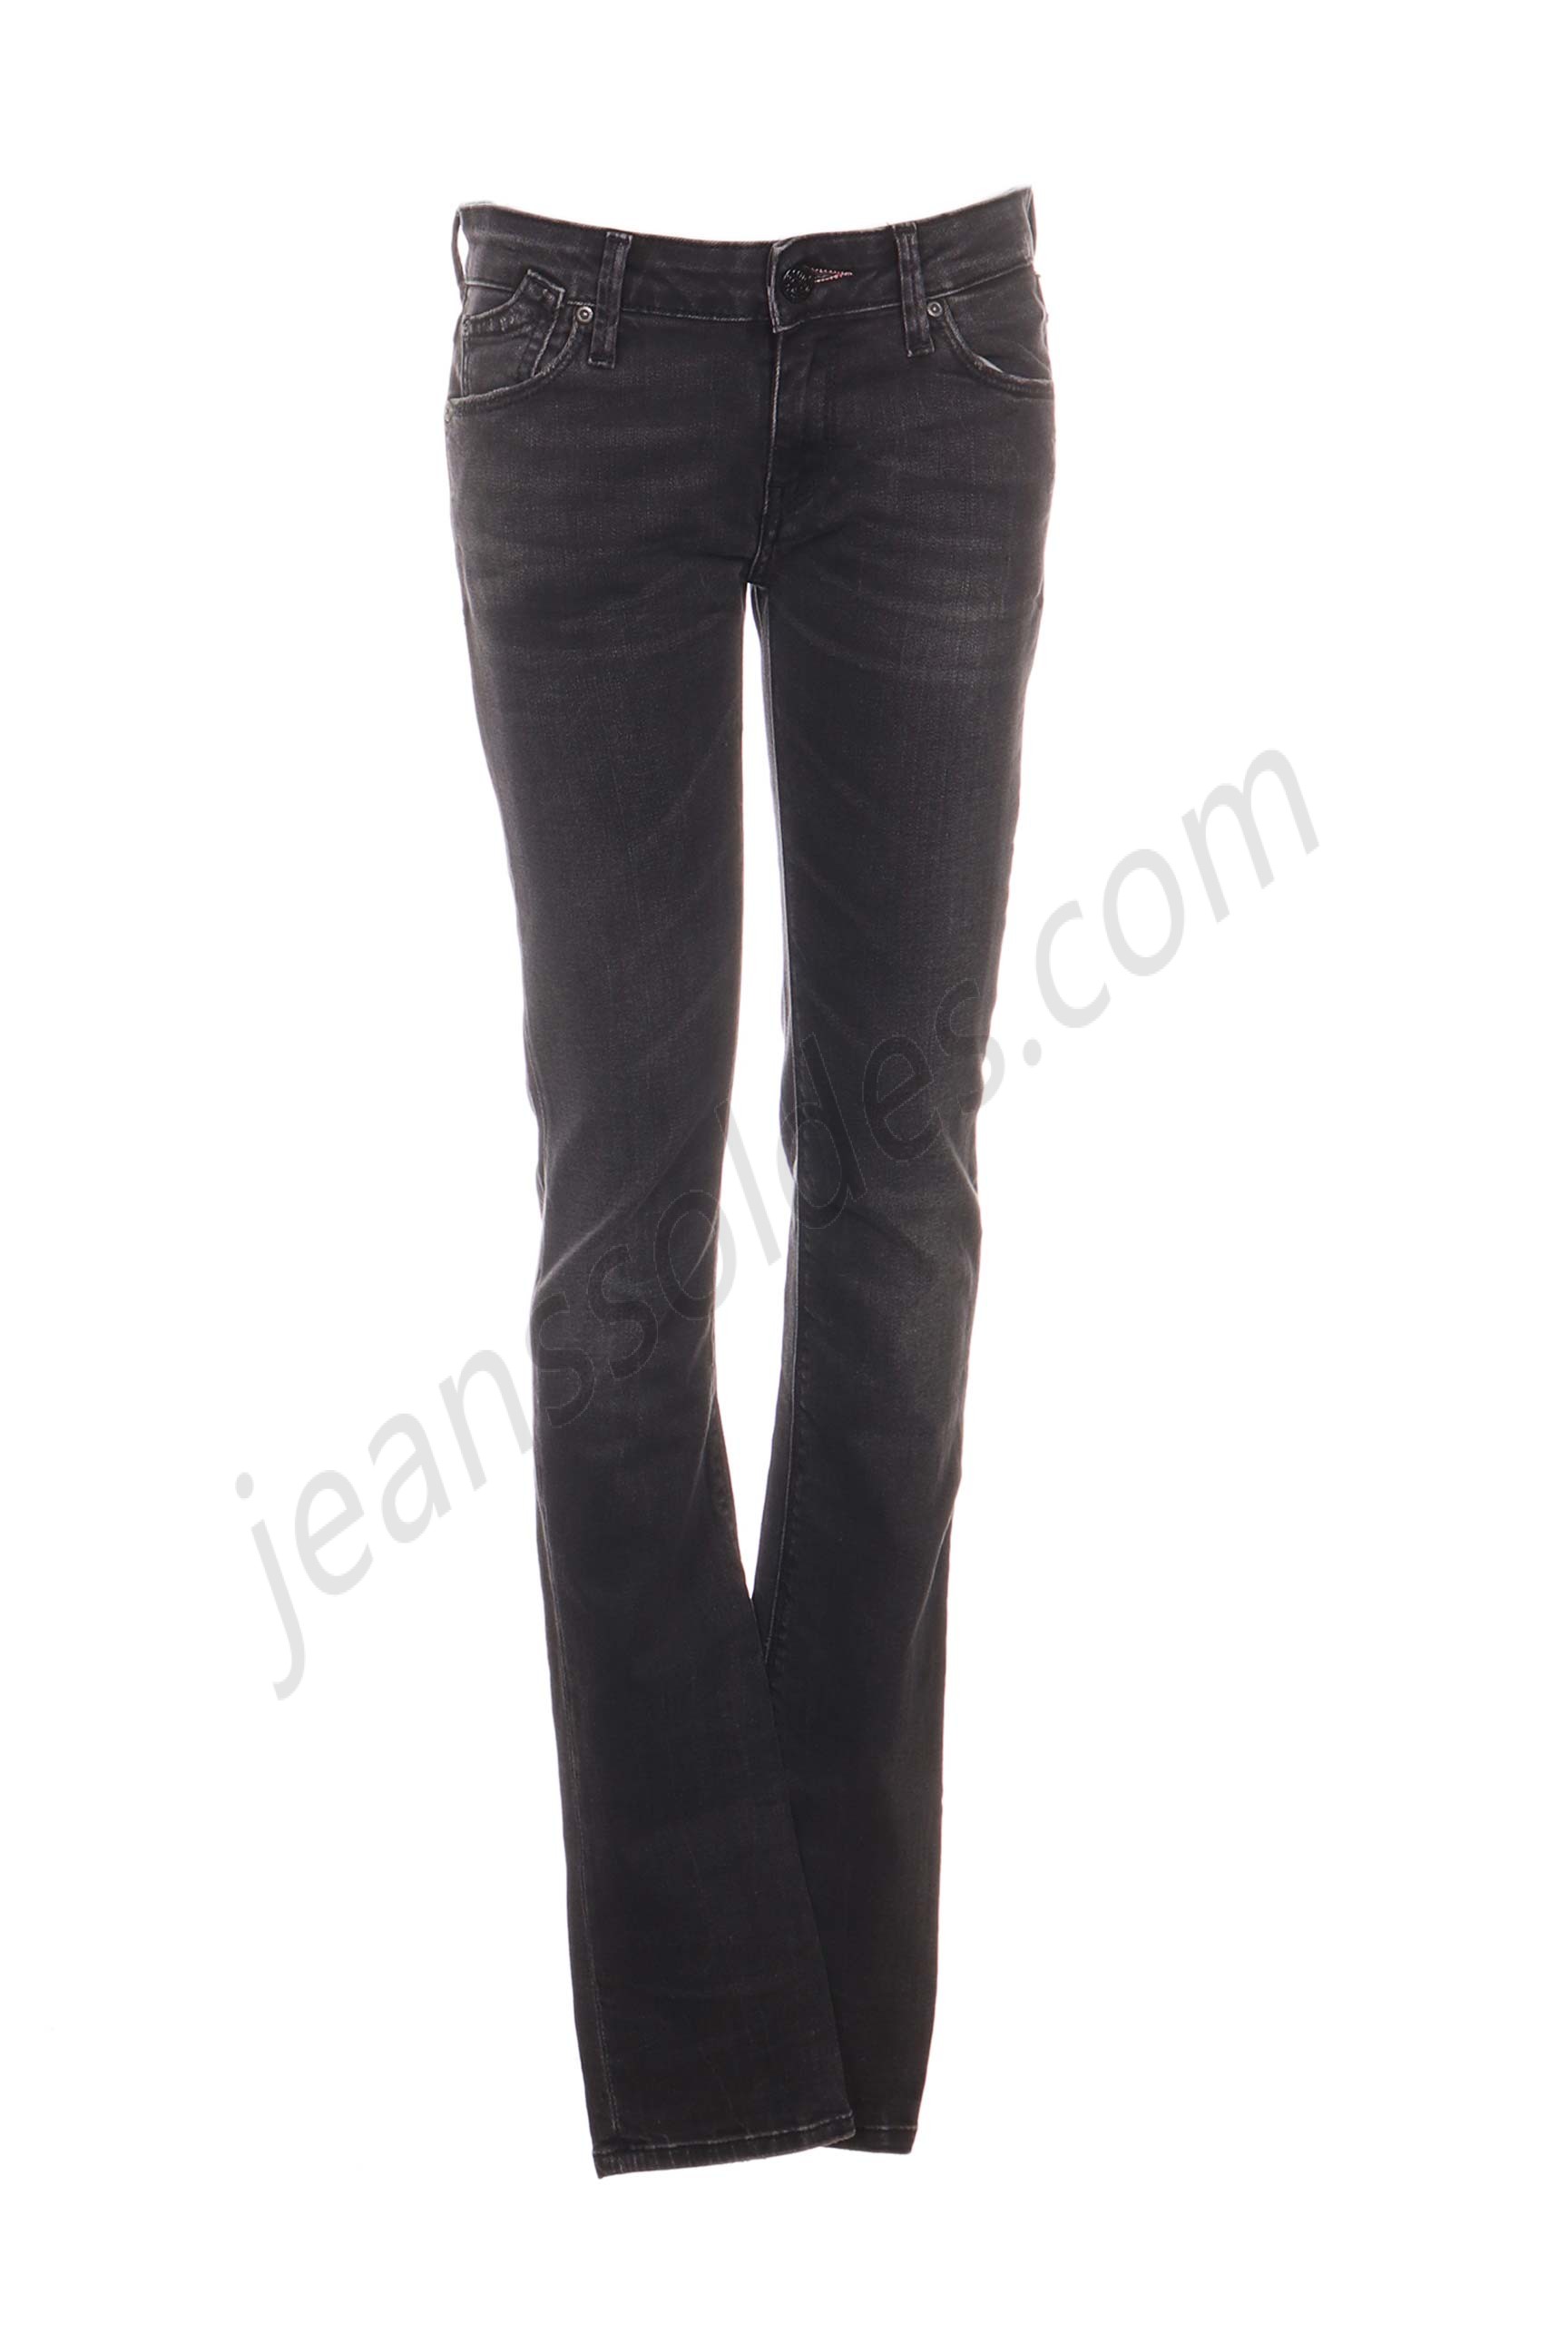 replay-Jeans coupe slim prix d’amis - replay-Jeans coupe slim prix d’amis